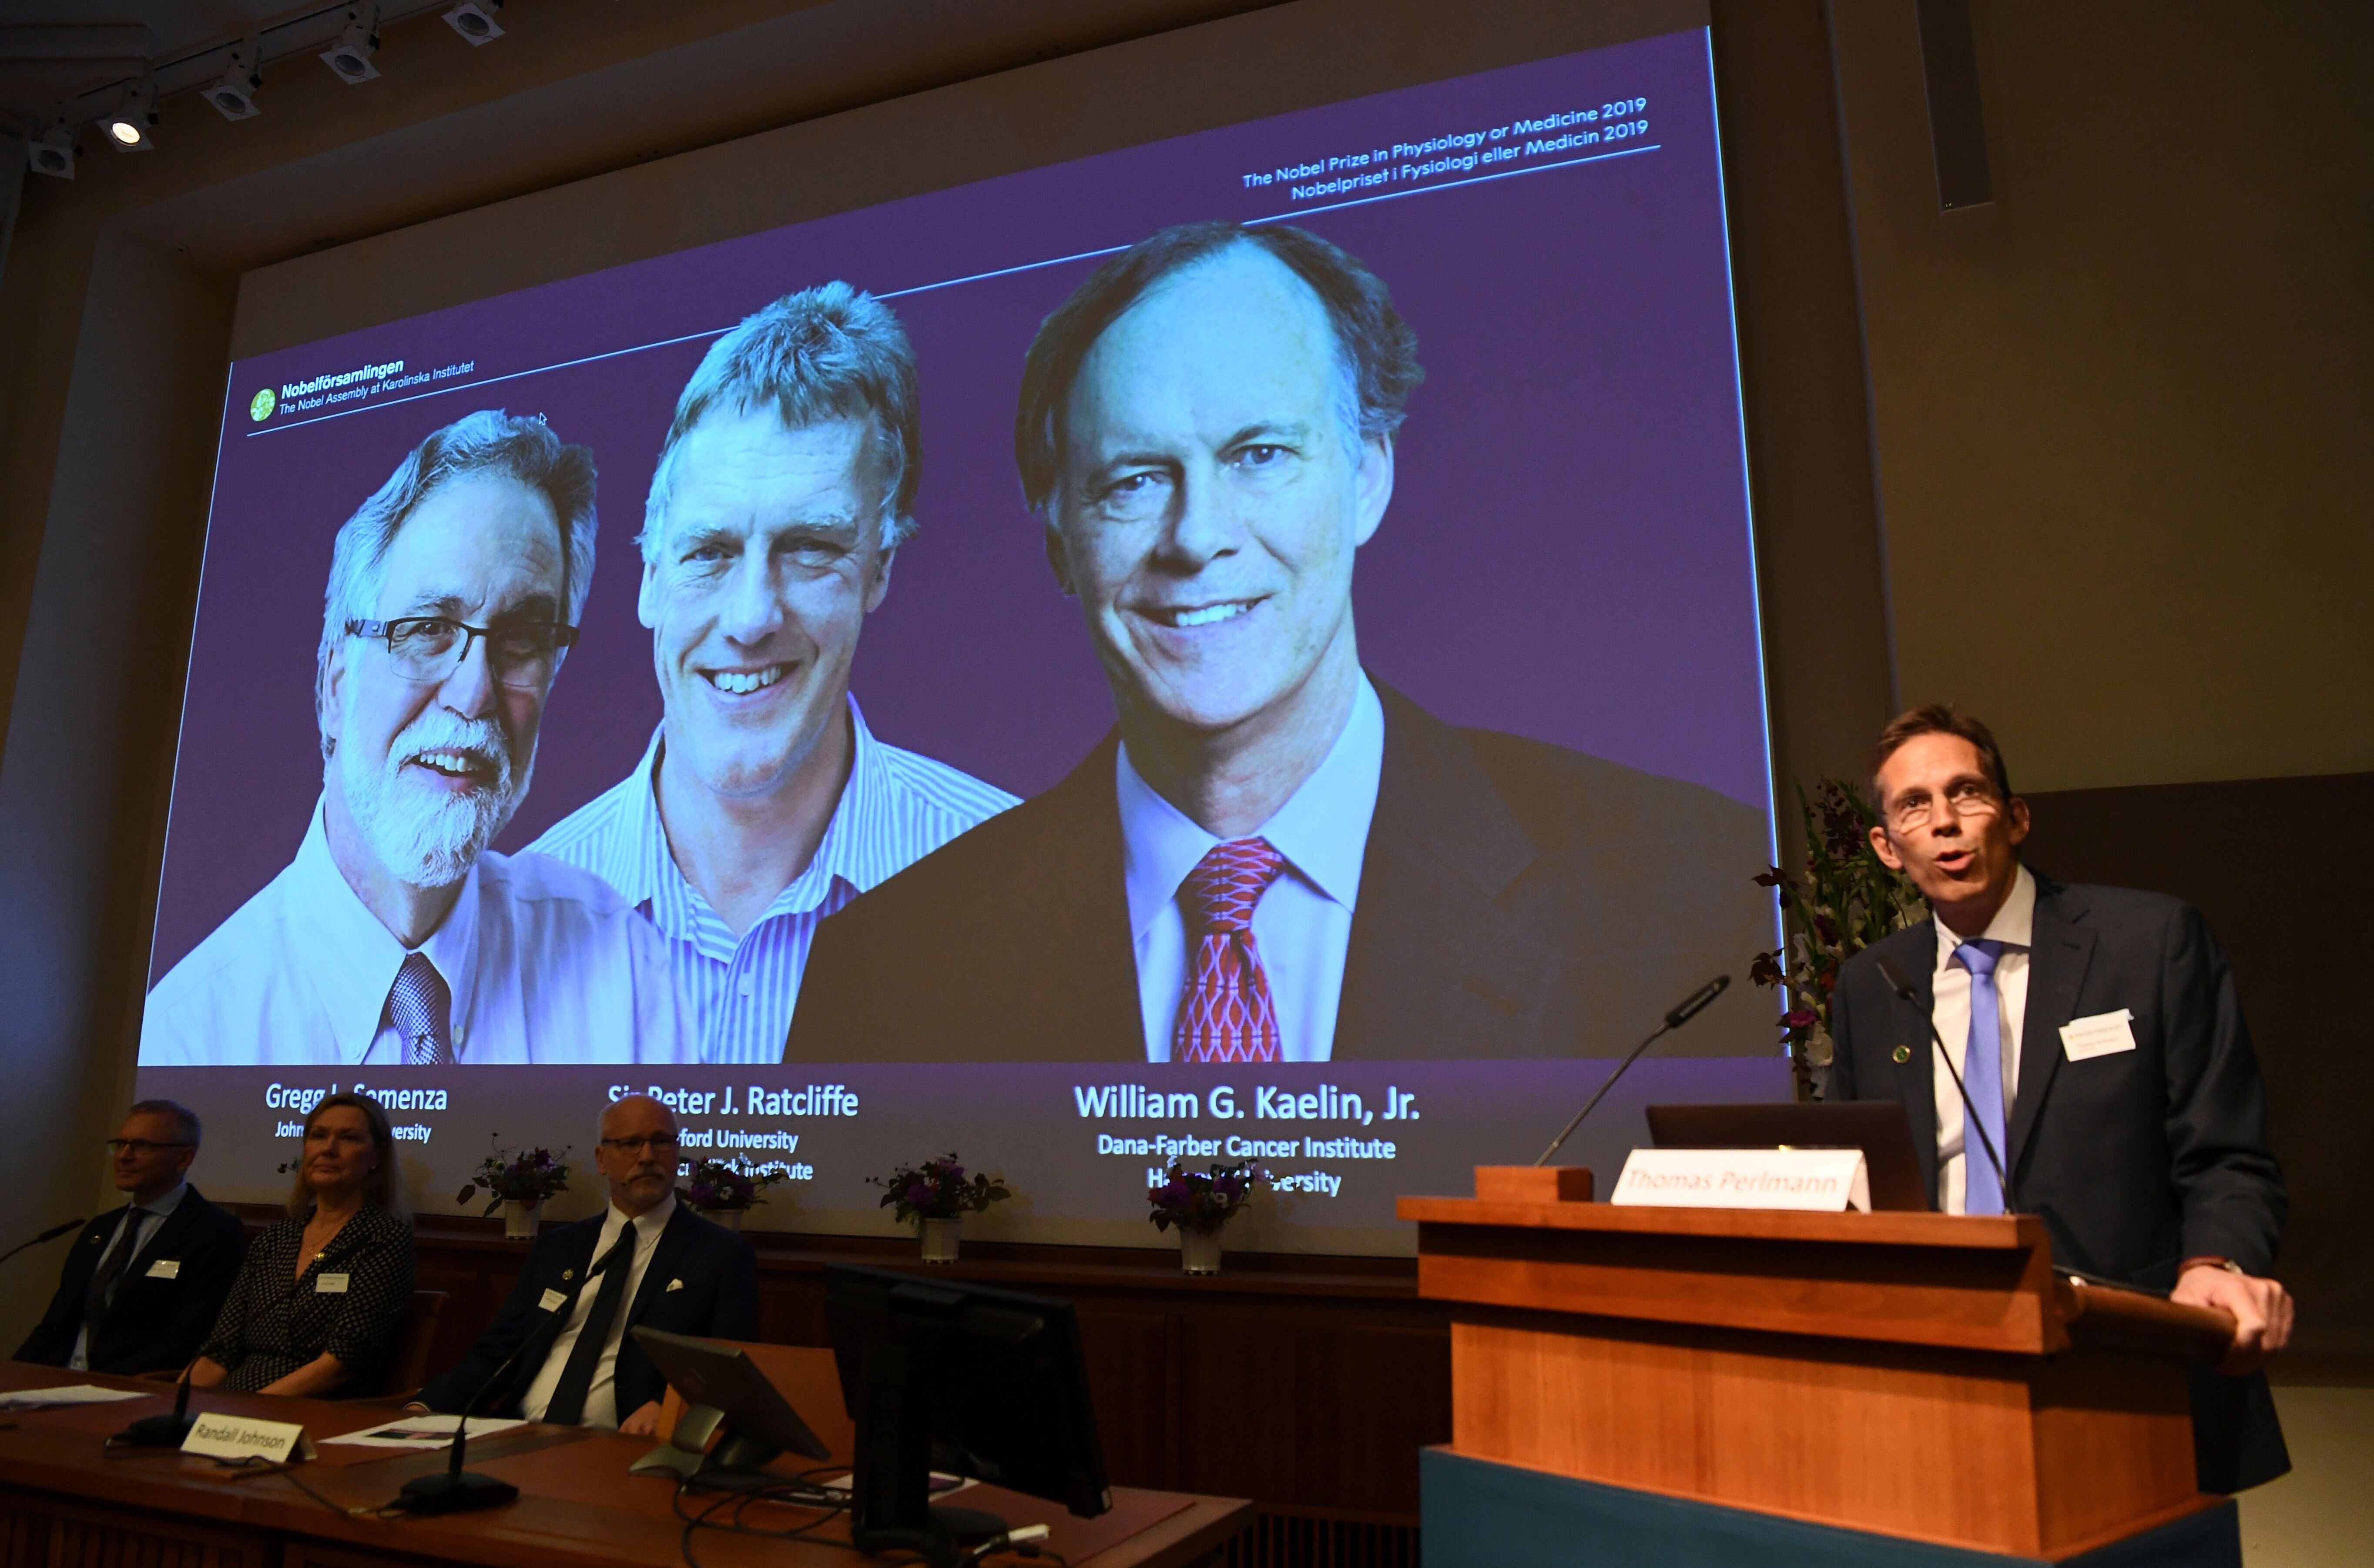 3 Scientists Win Nobel Medicine Prize For Work On How Cells Adapt To Oxygen Availability